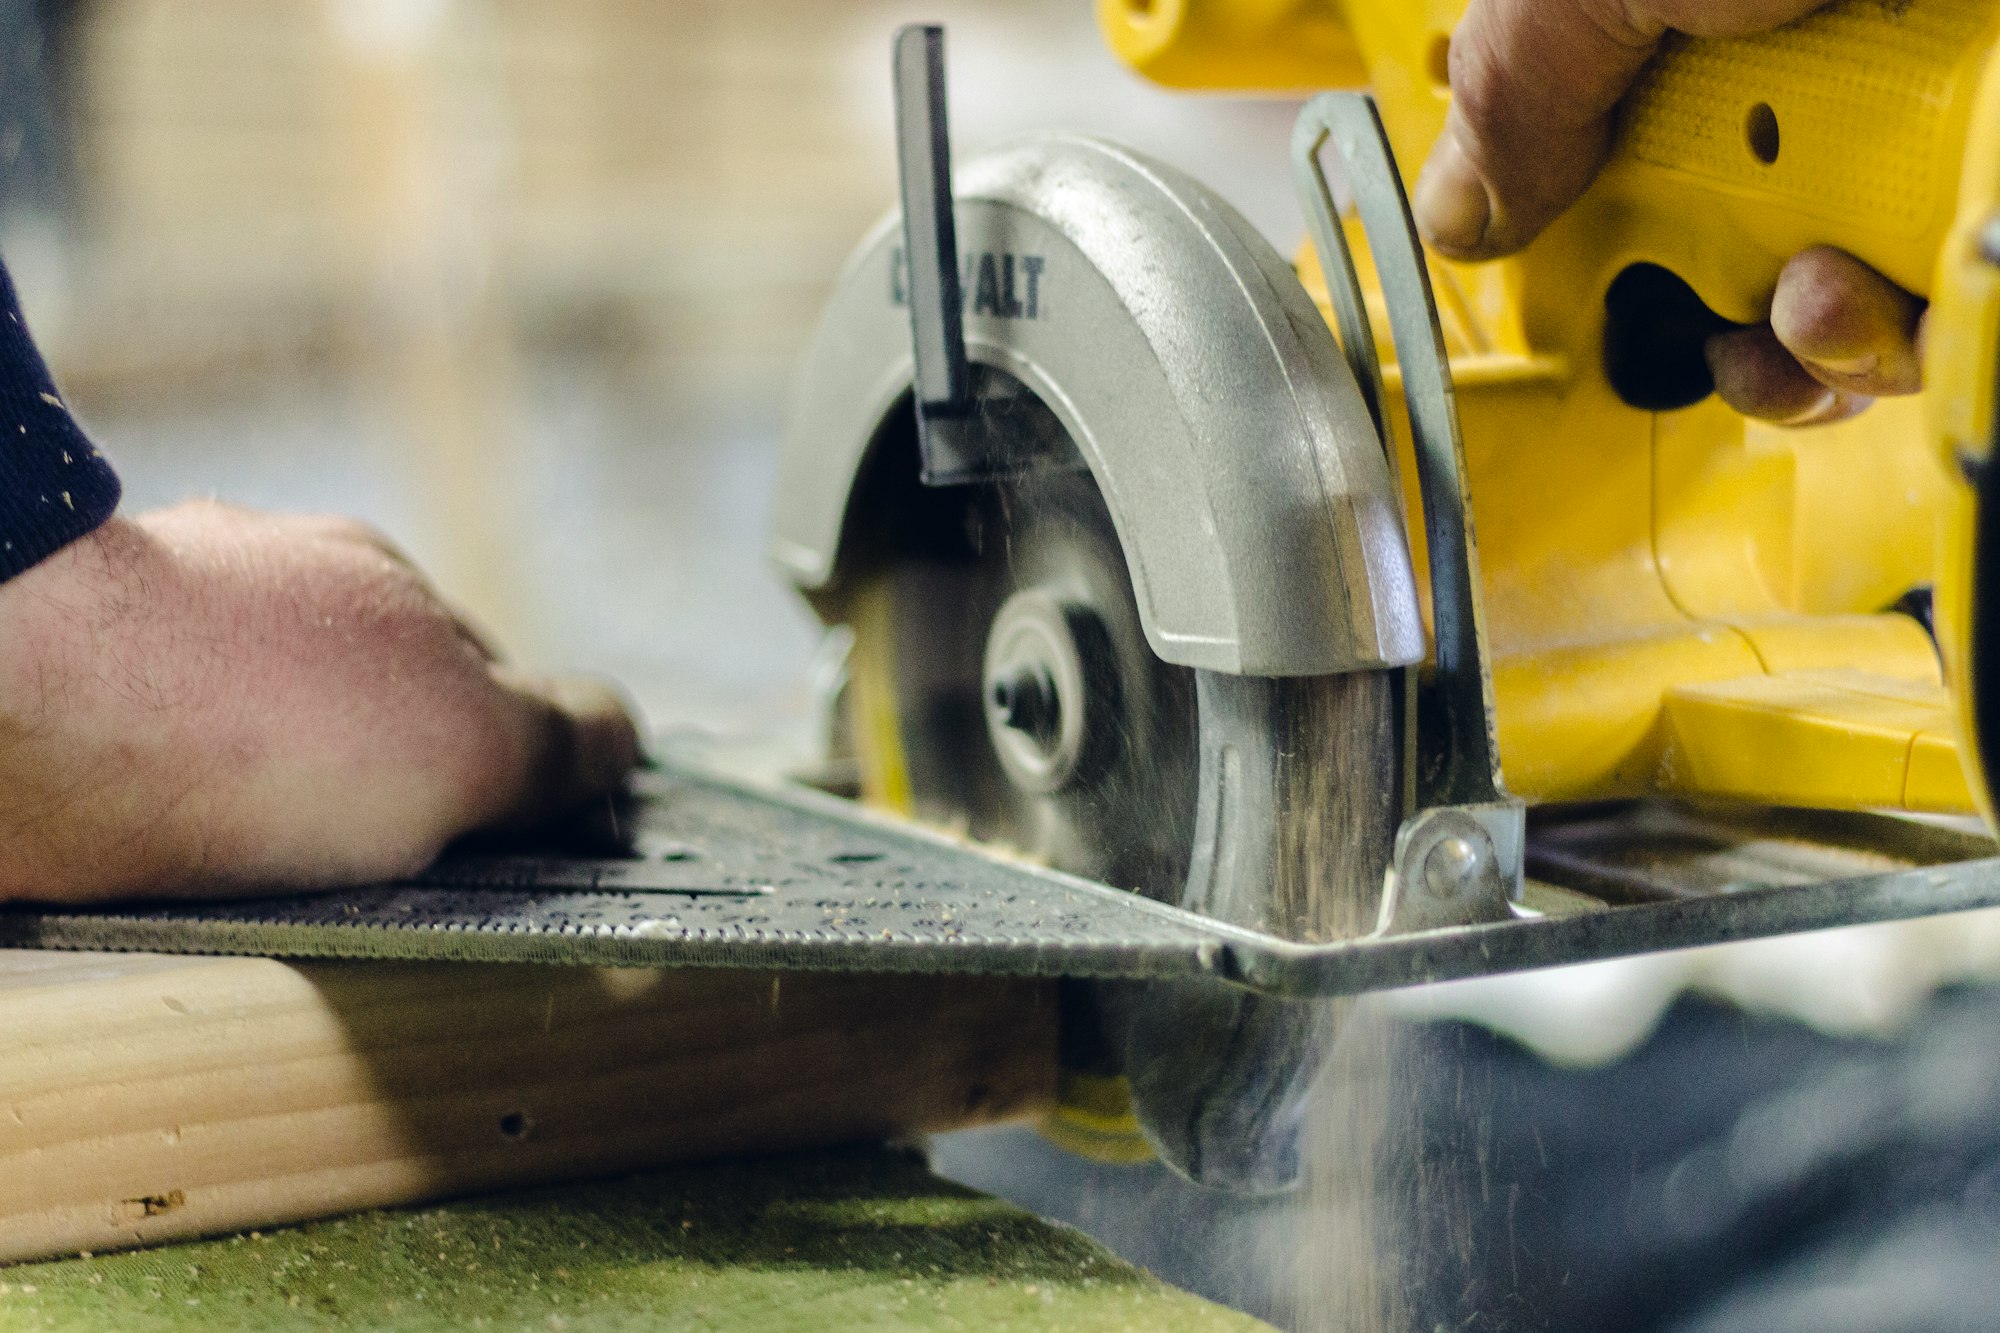 Circular Saw Parts: How to Find the Right One